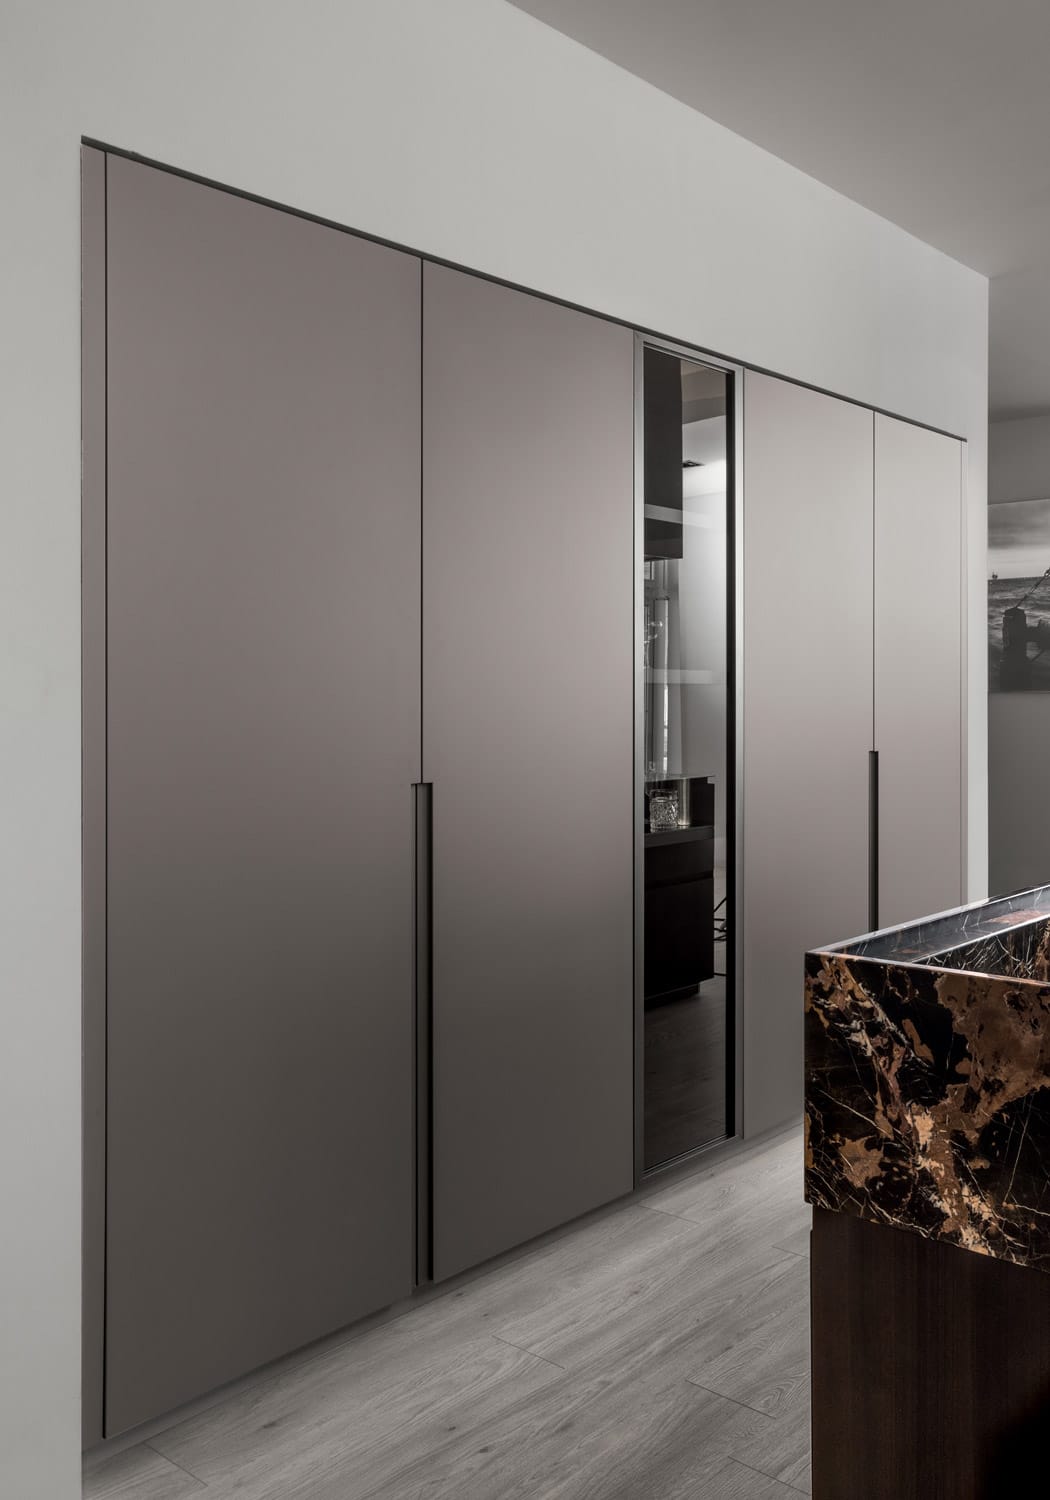 The design also includes tall units in London Grey lacquer built inside the kitchen wall. 